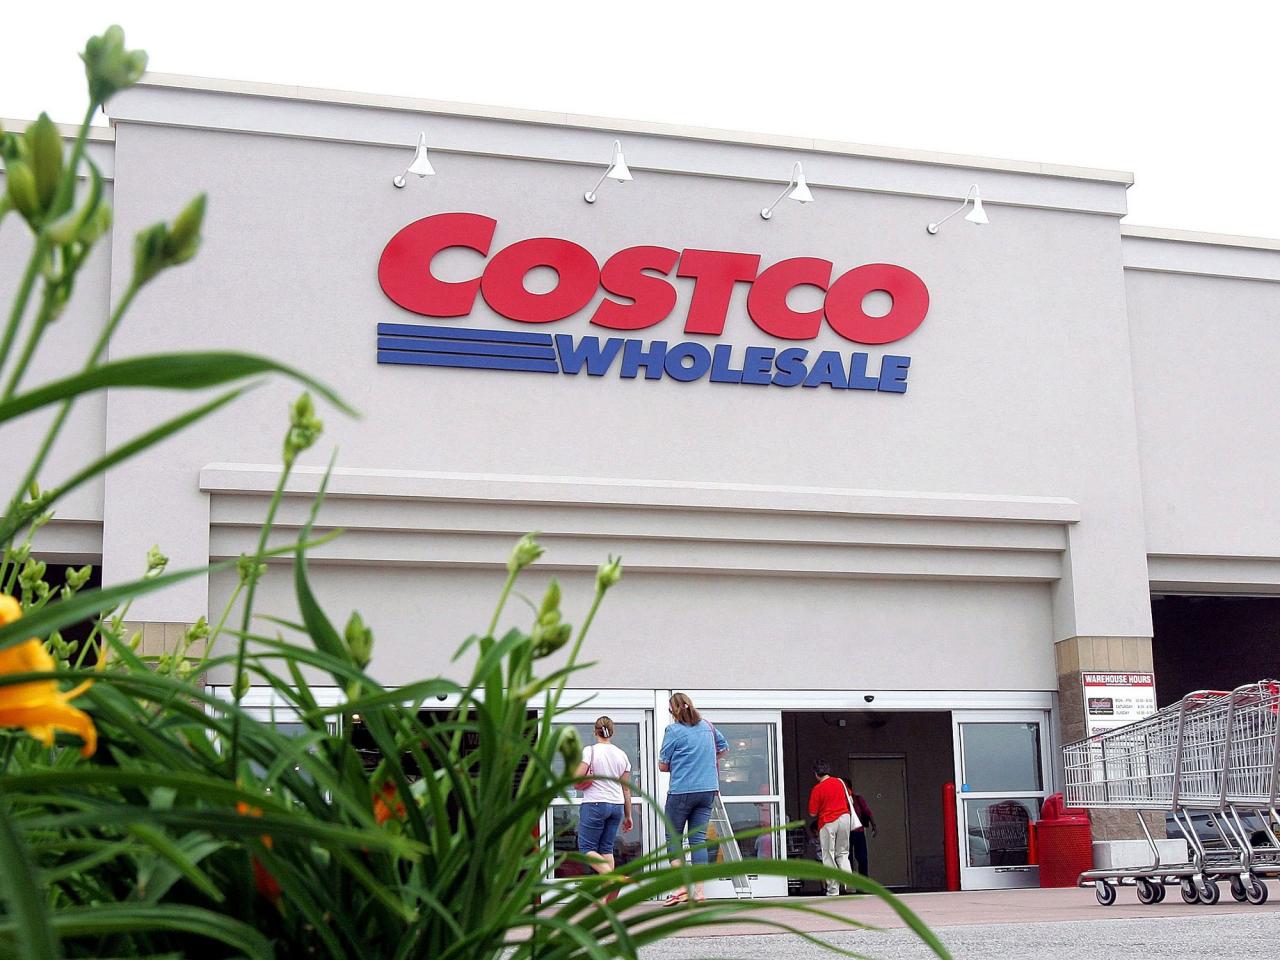 Costco membership: What to know, perks, fees and more